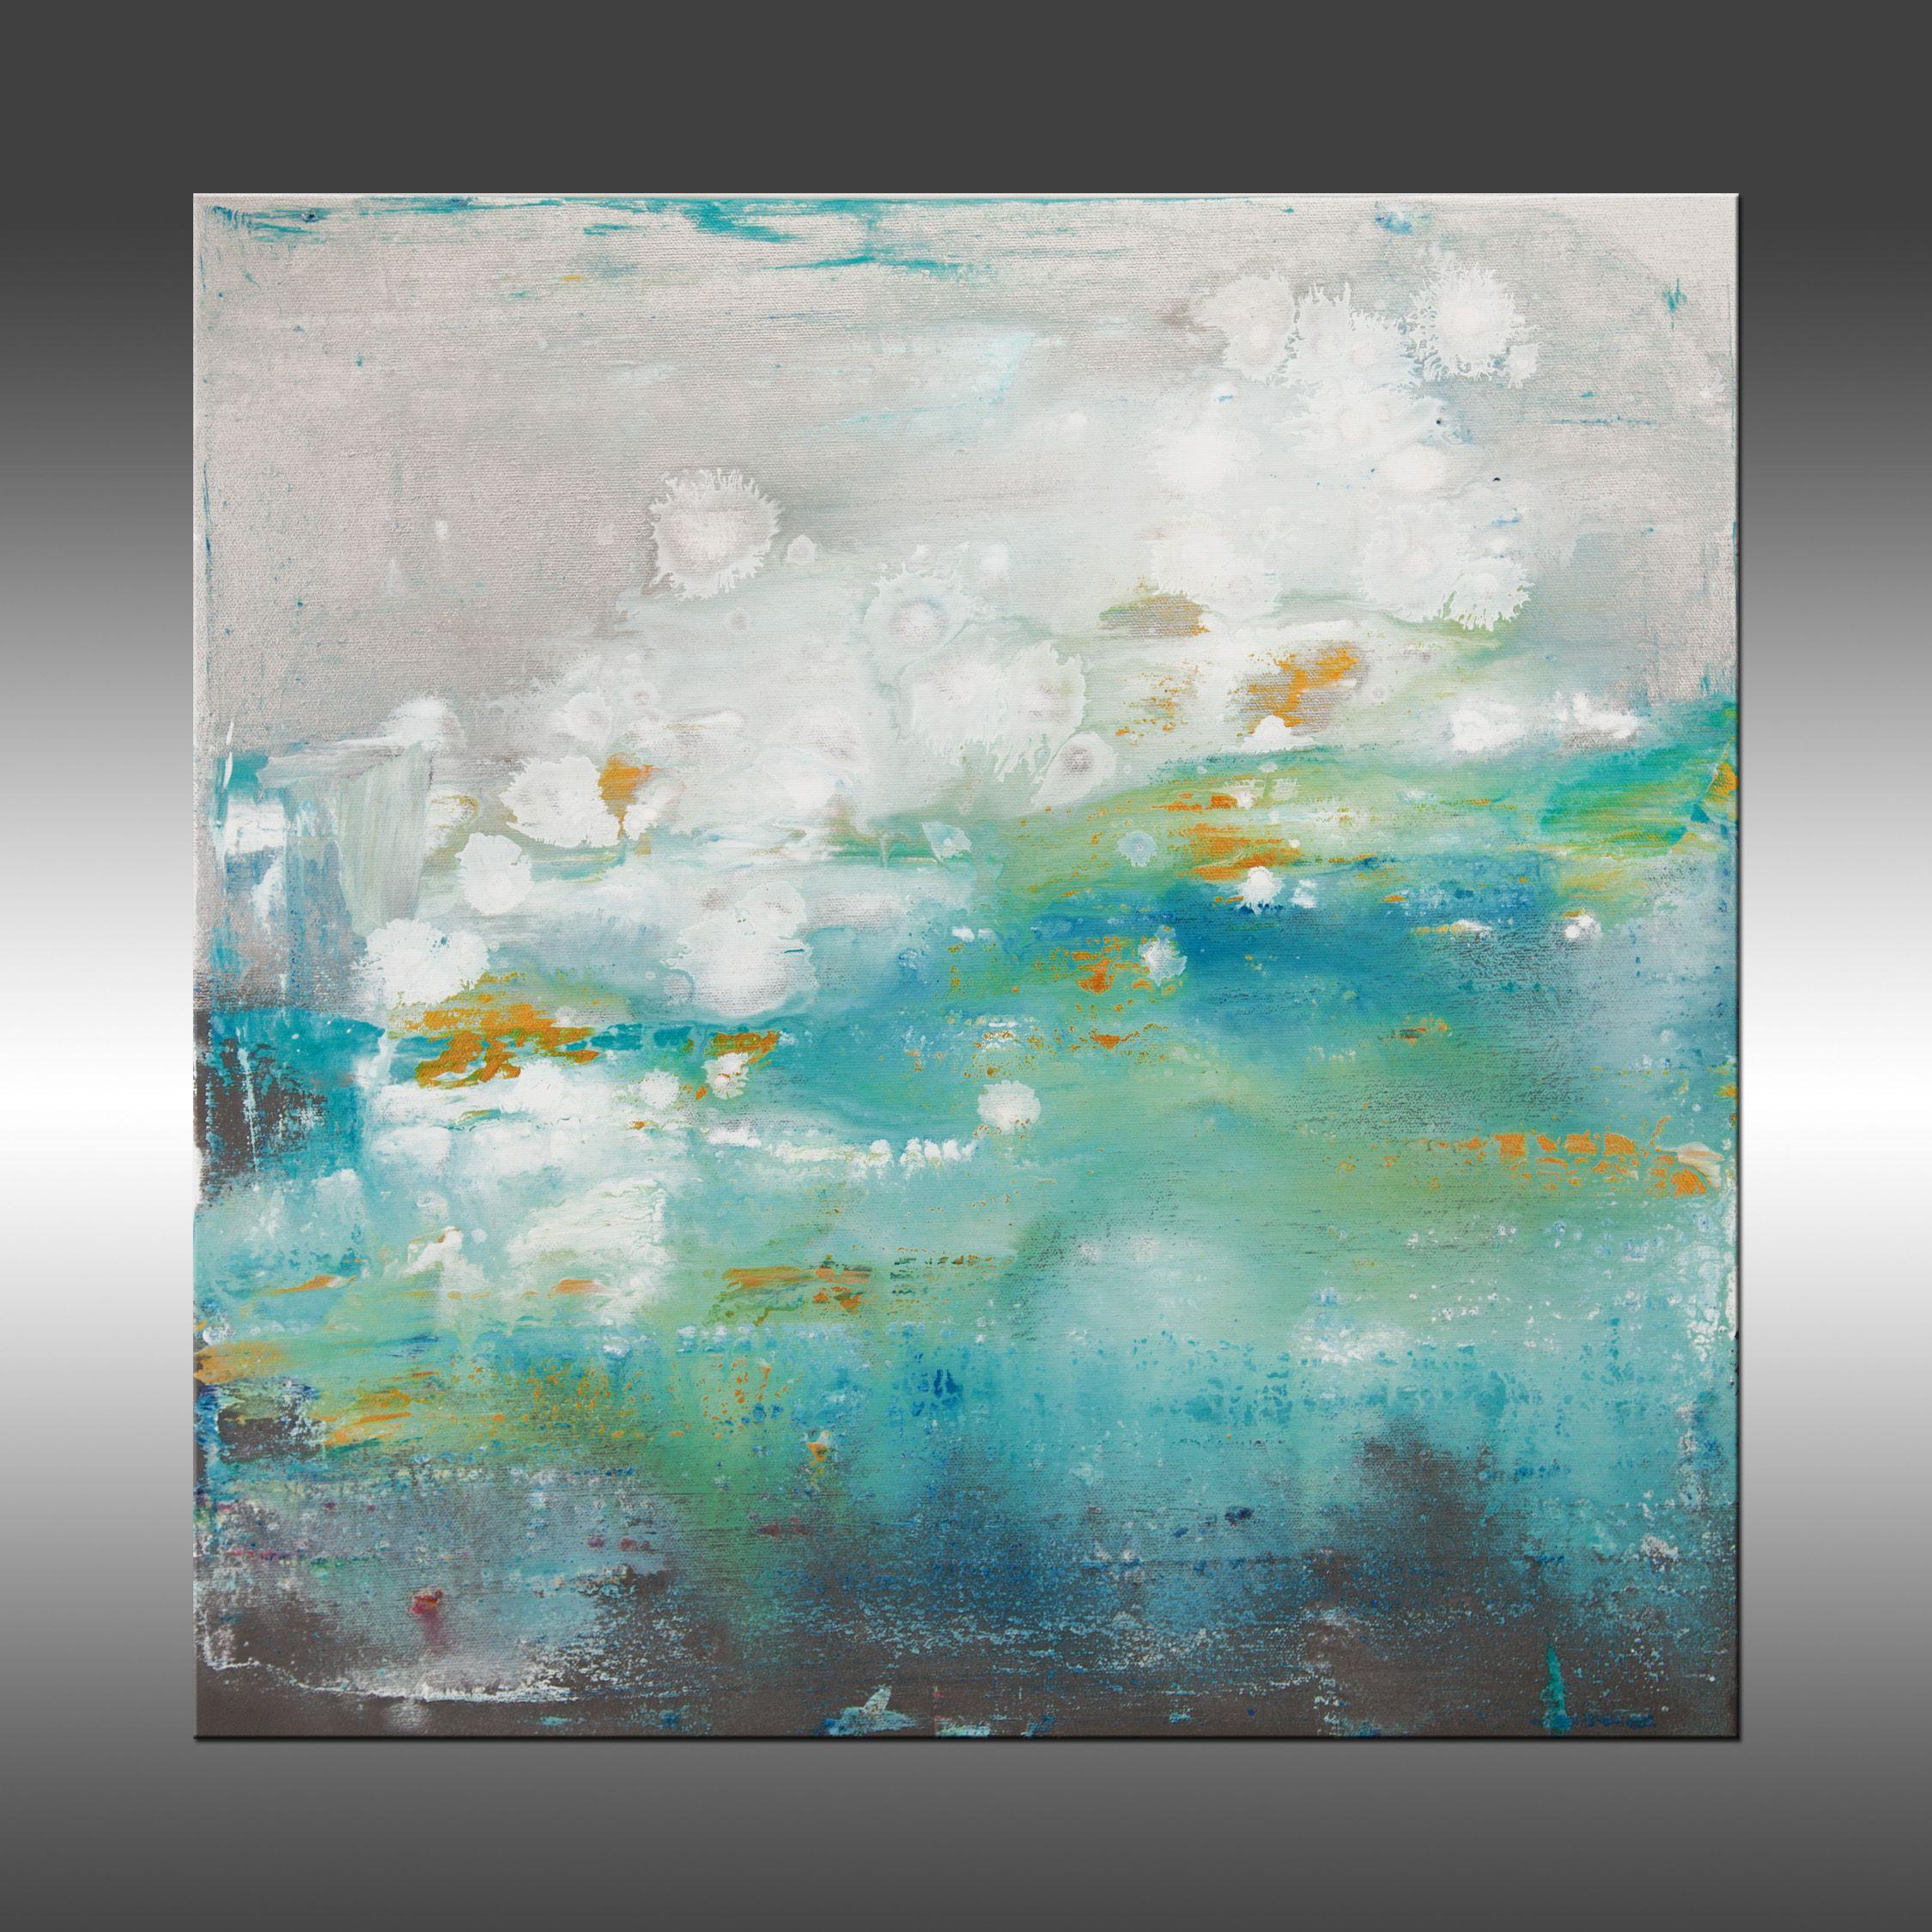 Stratosphere 12 is an original painting, created with acrylic paint on gallery-wrapped canvas. It has a width of 20 inches and a height of 20 inches with a depth of 1.5 inches (20x20x1.5).     The colors used in the painting are teal, blue, white,